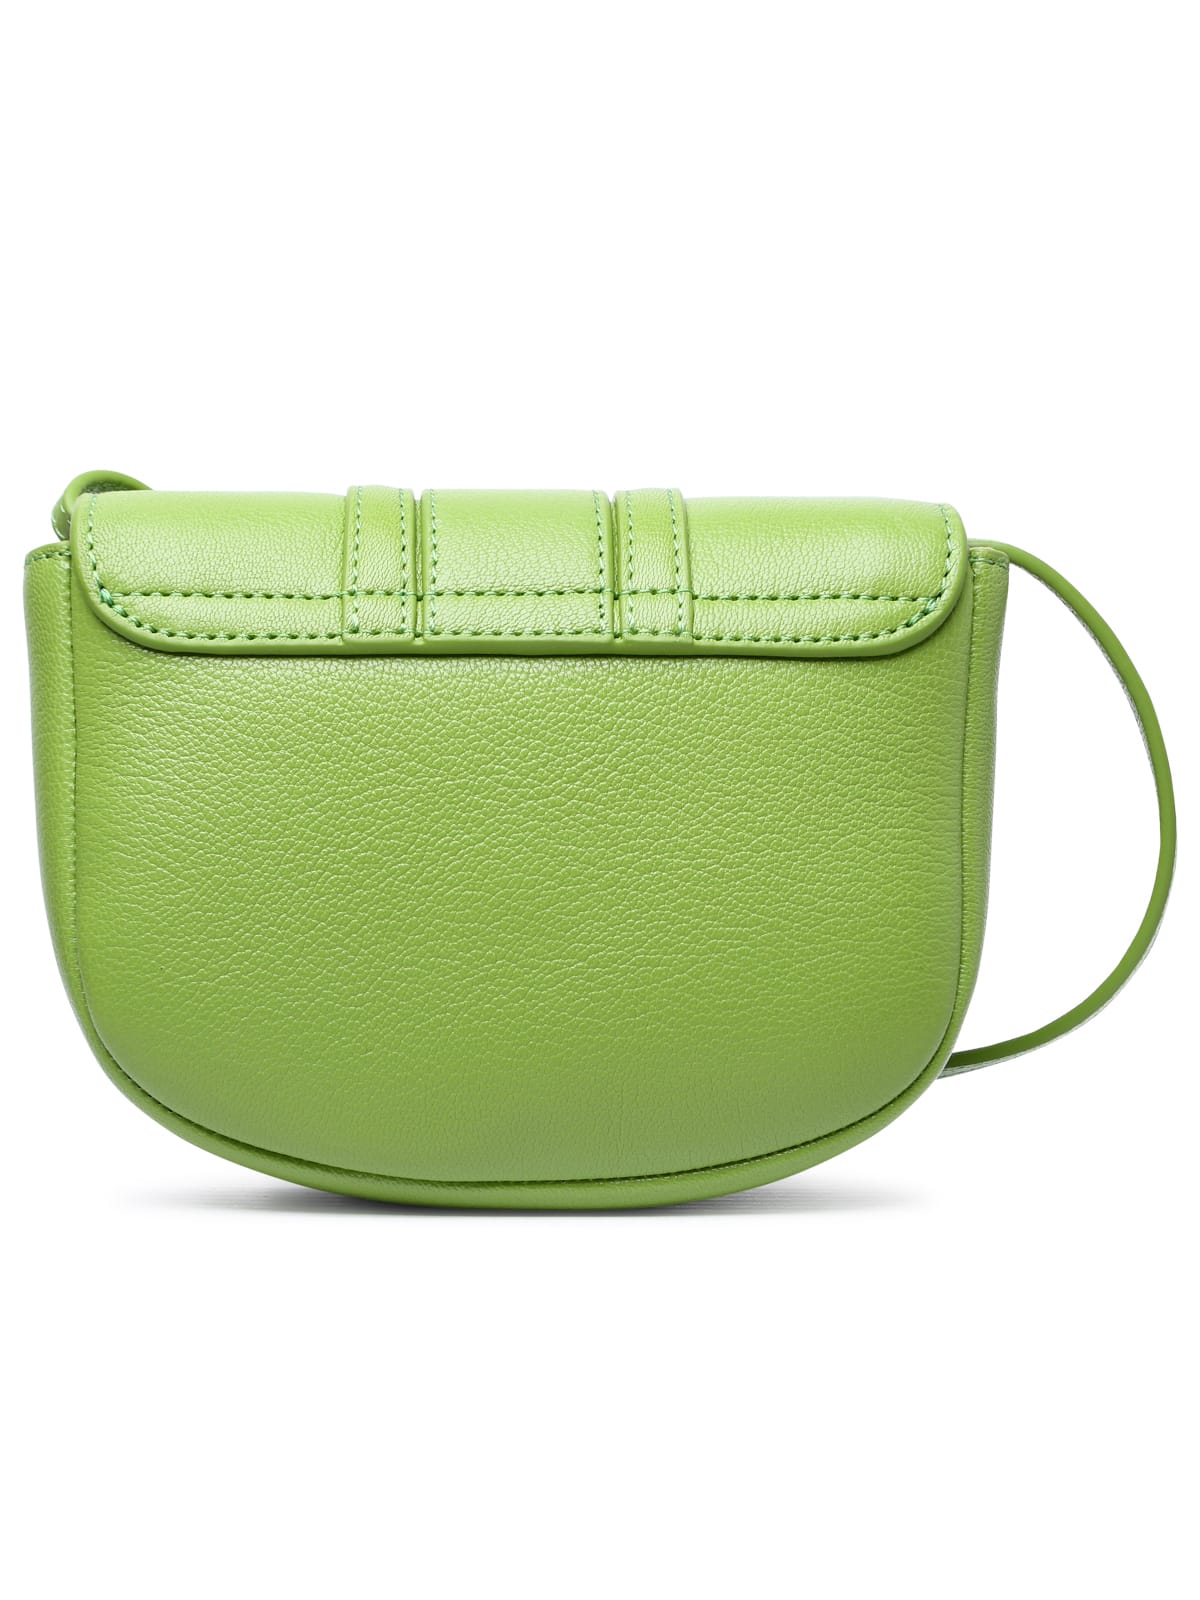 Shop See By Chloé Hana Small Green Leather Bag